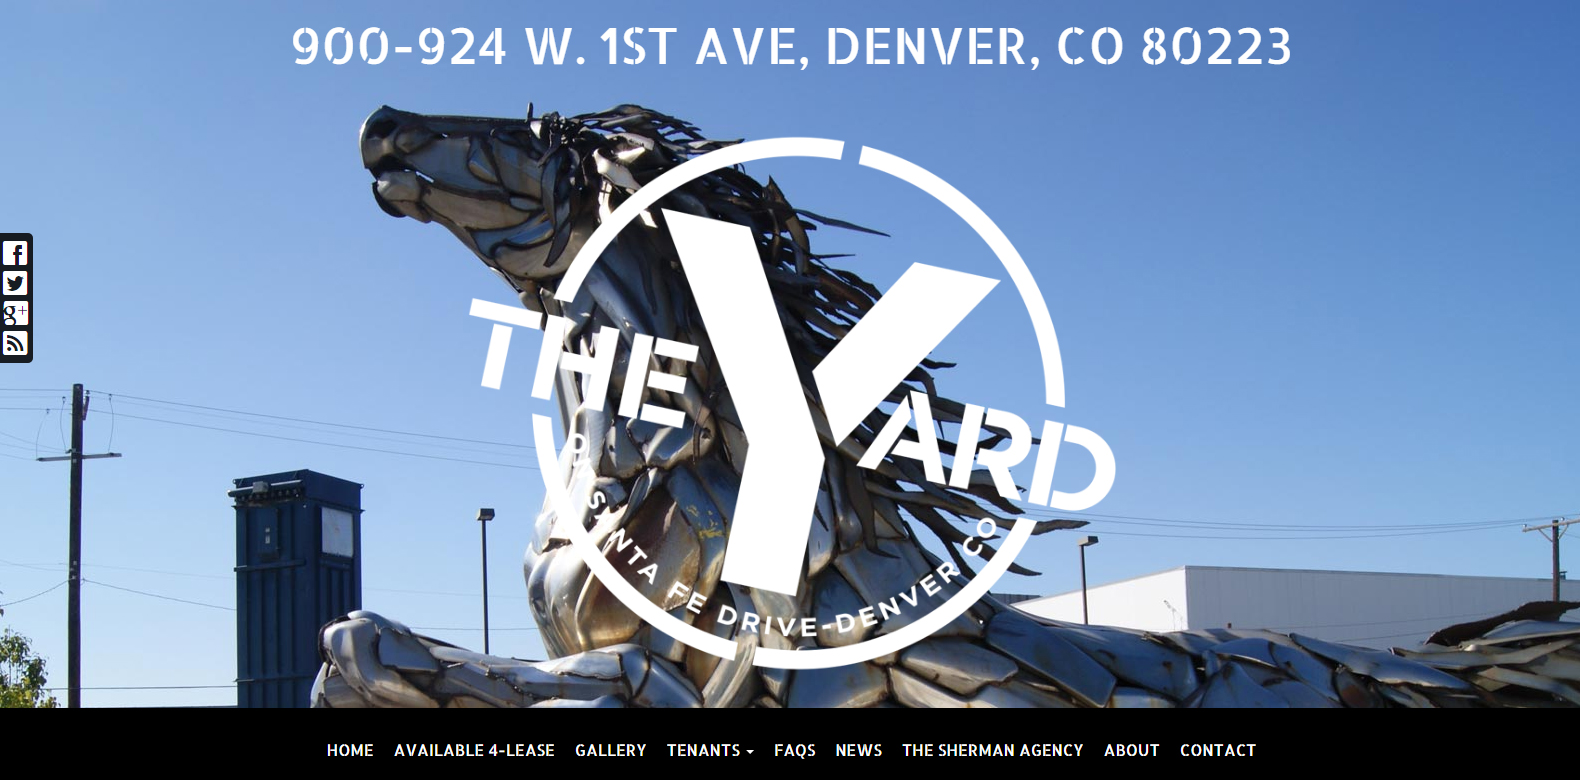 
New Website Launched: The Yard on Santa Fe